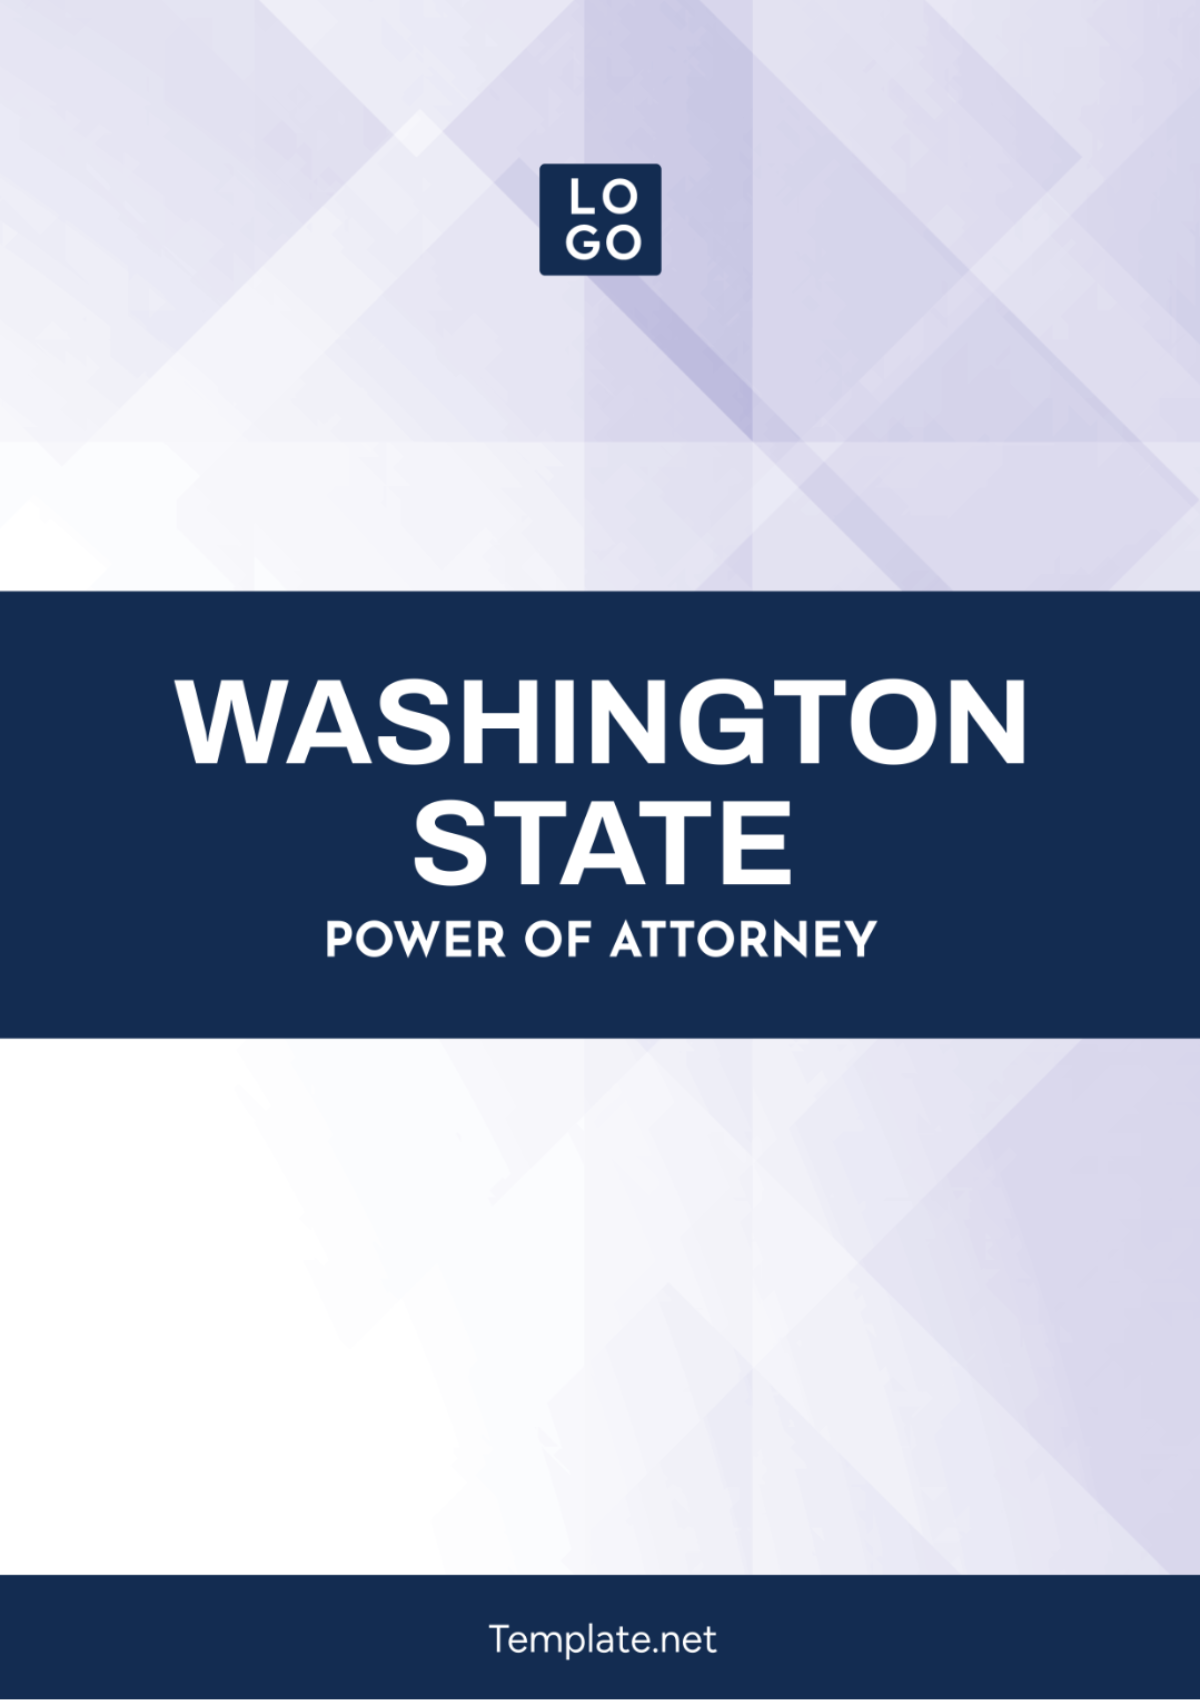 Washington State Power of Attorney Template